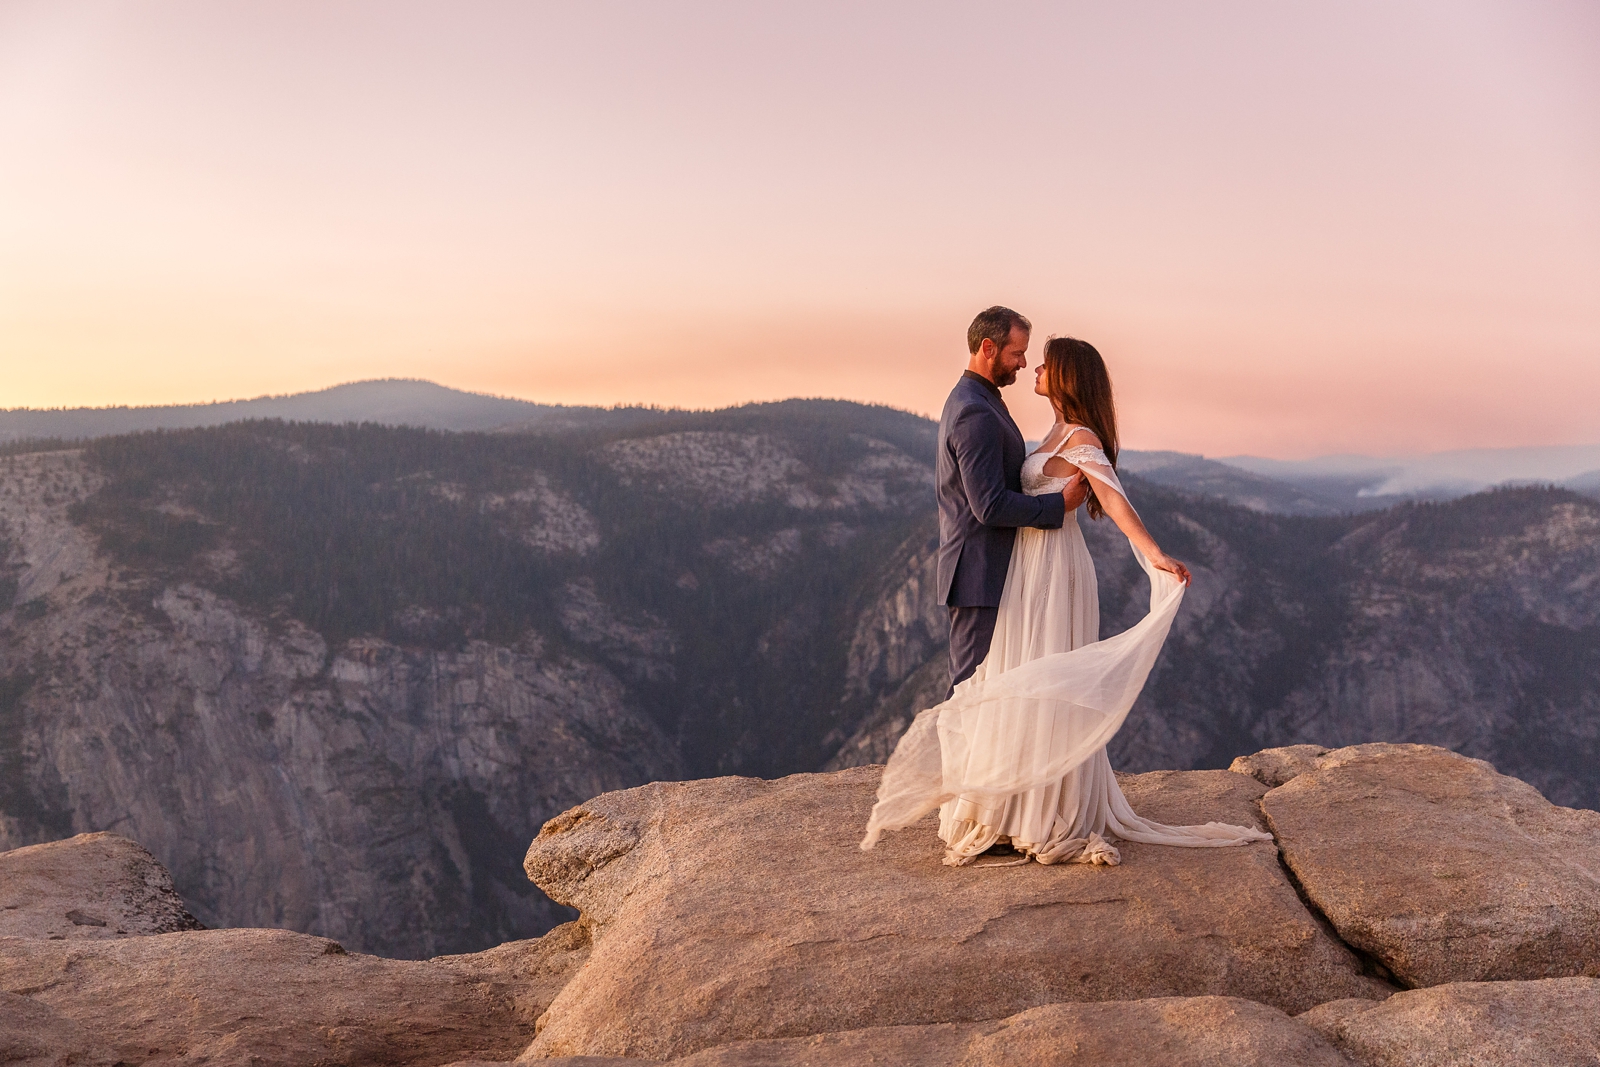 Dreamy magical elopement at sunset in Yosemite.